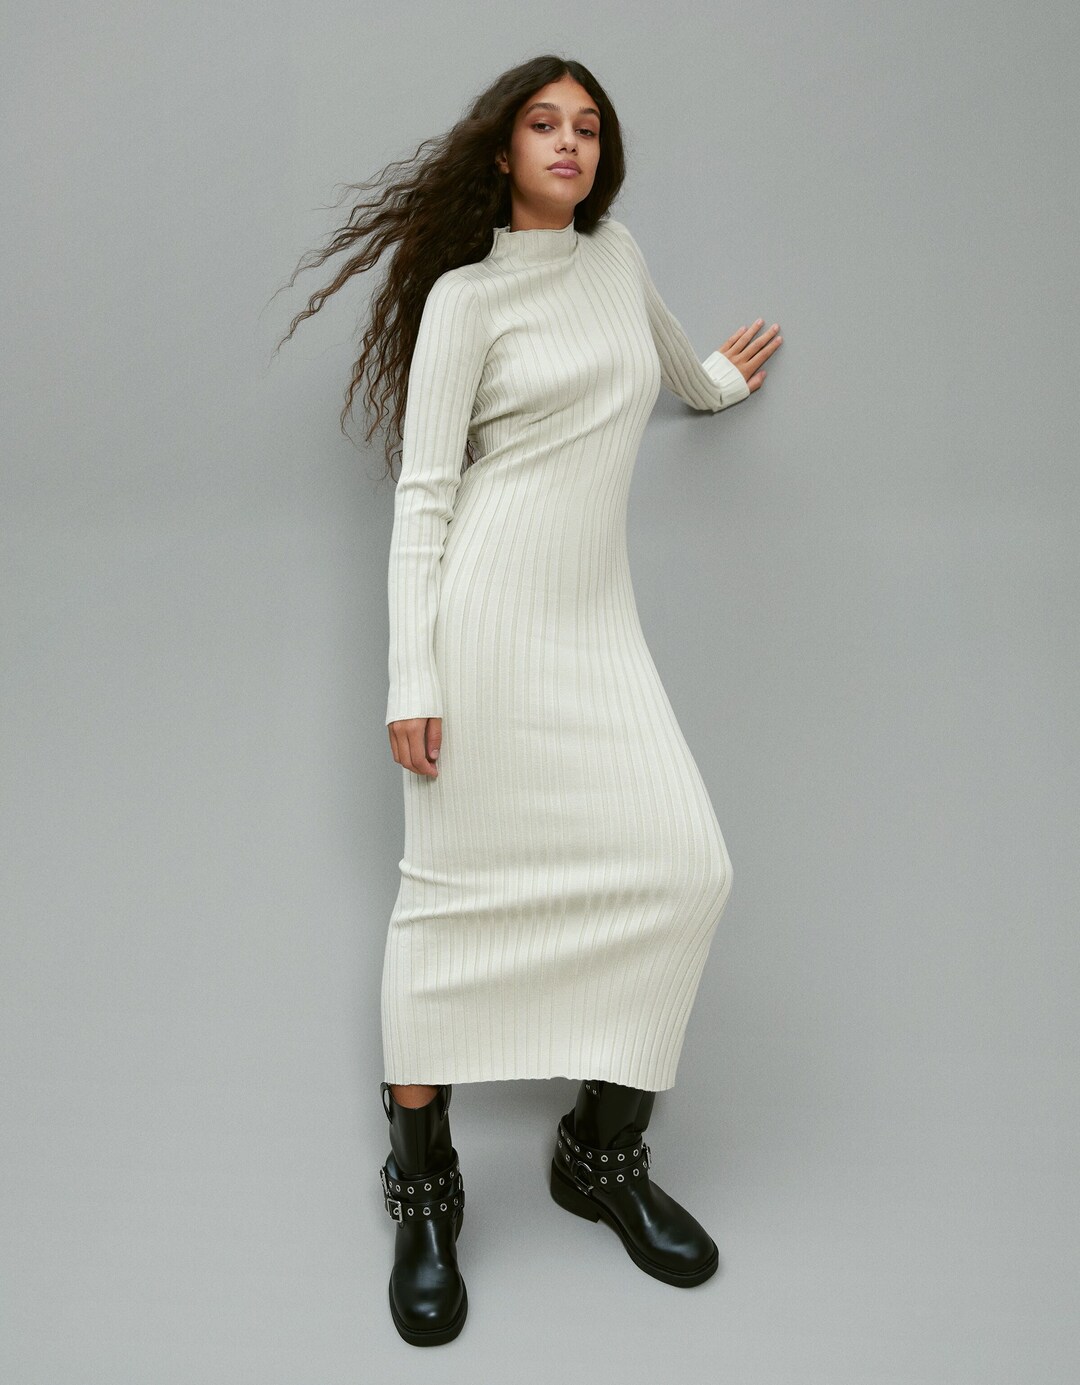 Ribbed knit midi dress with high neck